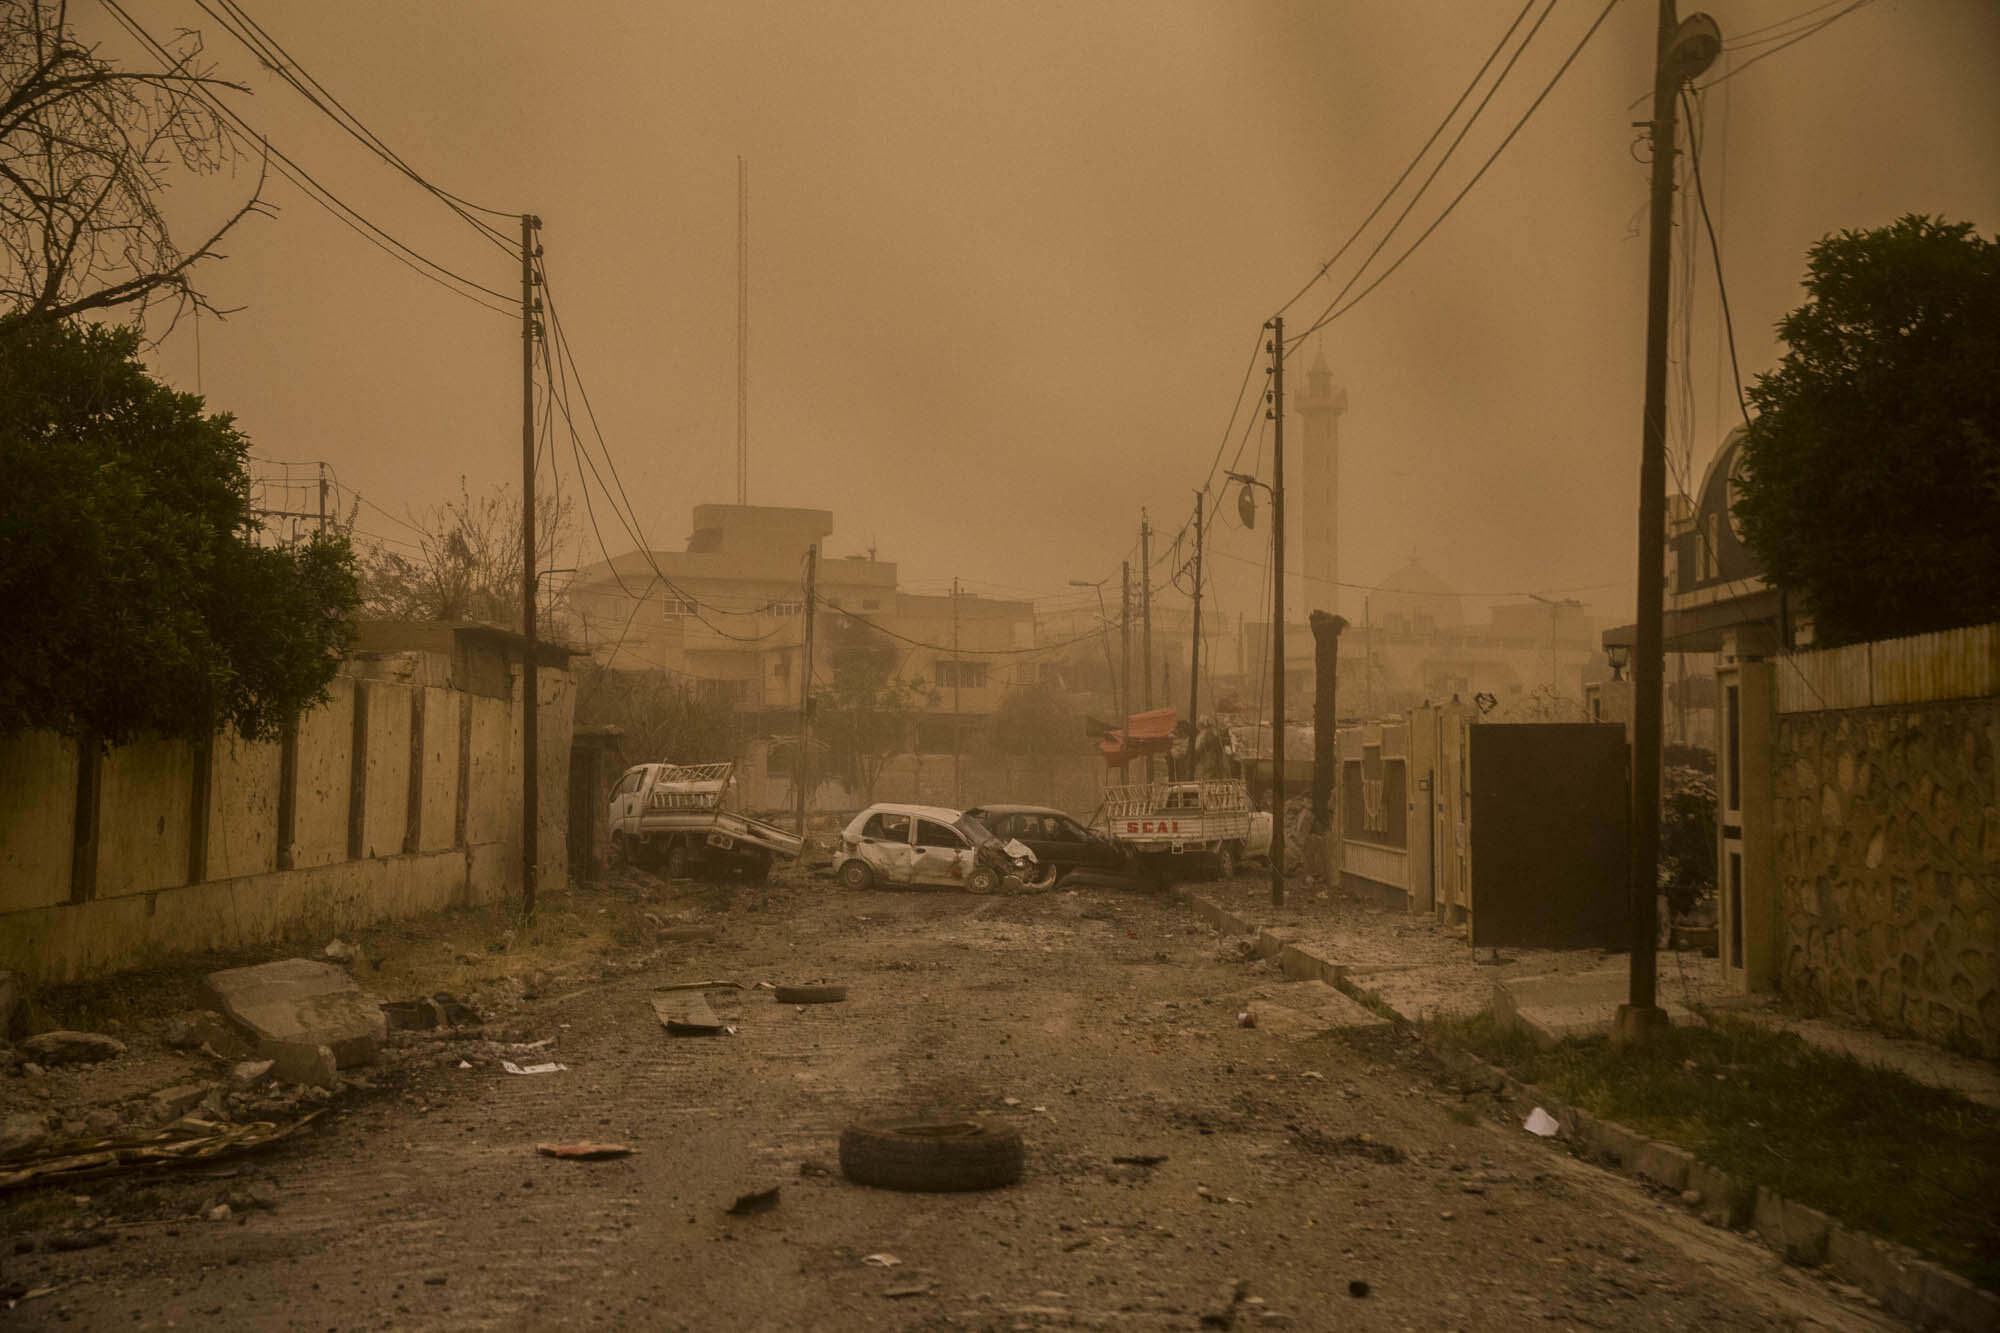  Vehicles blocking the edge of the frontline in the Rifai neighbourhood of west Mosul were seen through the window of a humvee as a sandstorm moved in. Iraq - May 2017 